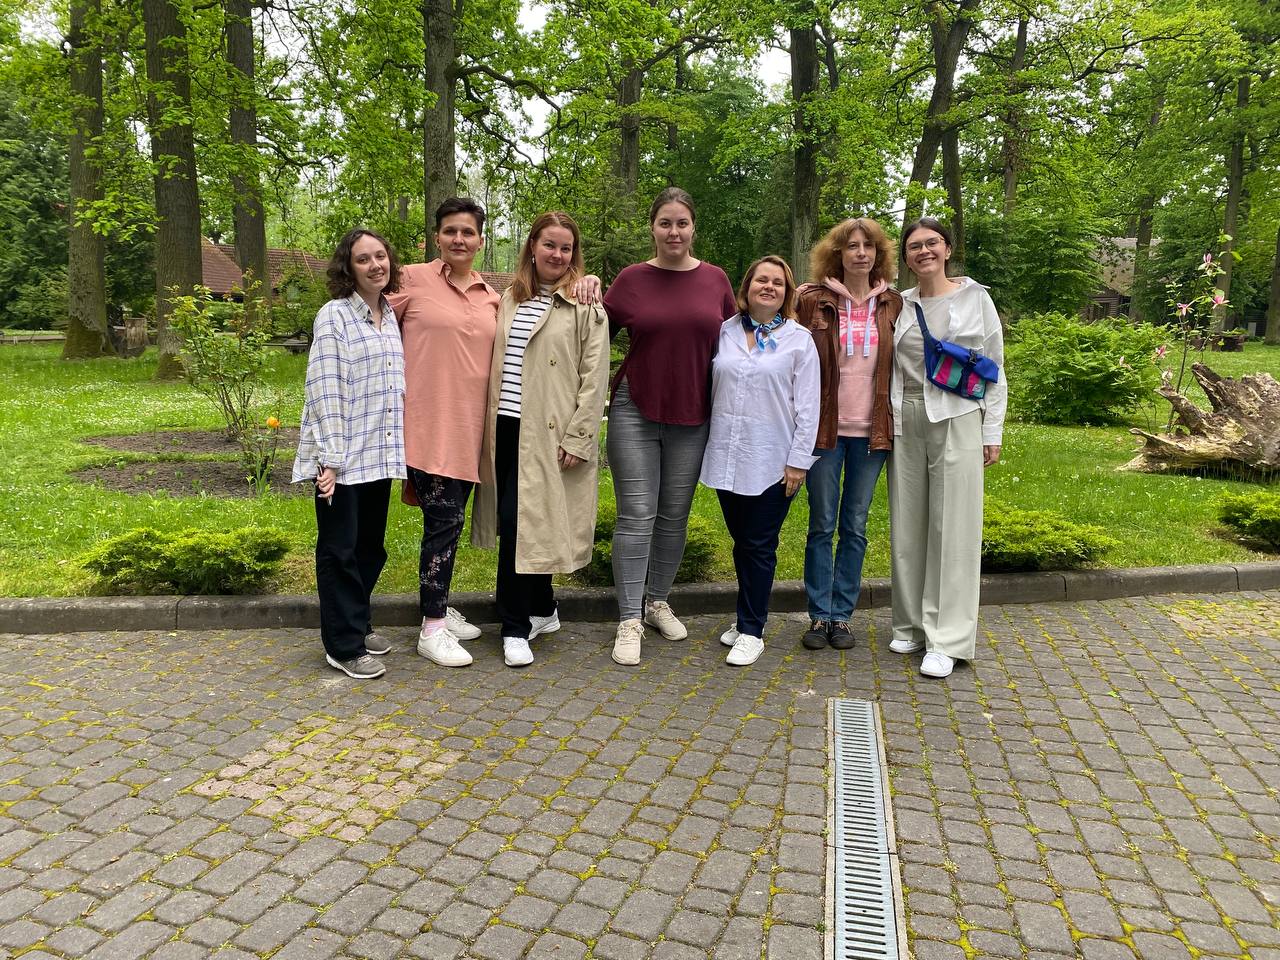 On May 18-19, Lviv hosted a training on team building and stress management for the staff of the Secretariat of the Ukrainian Child Rights Network